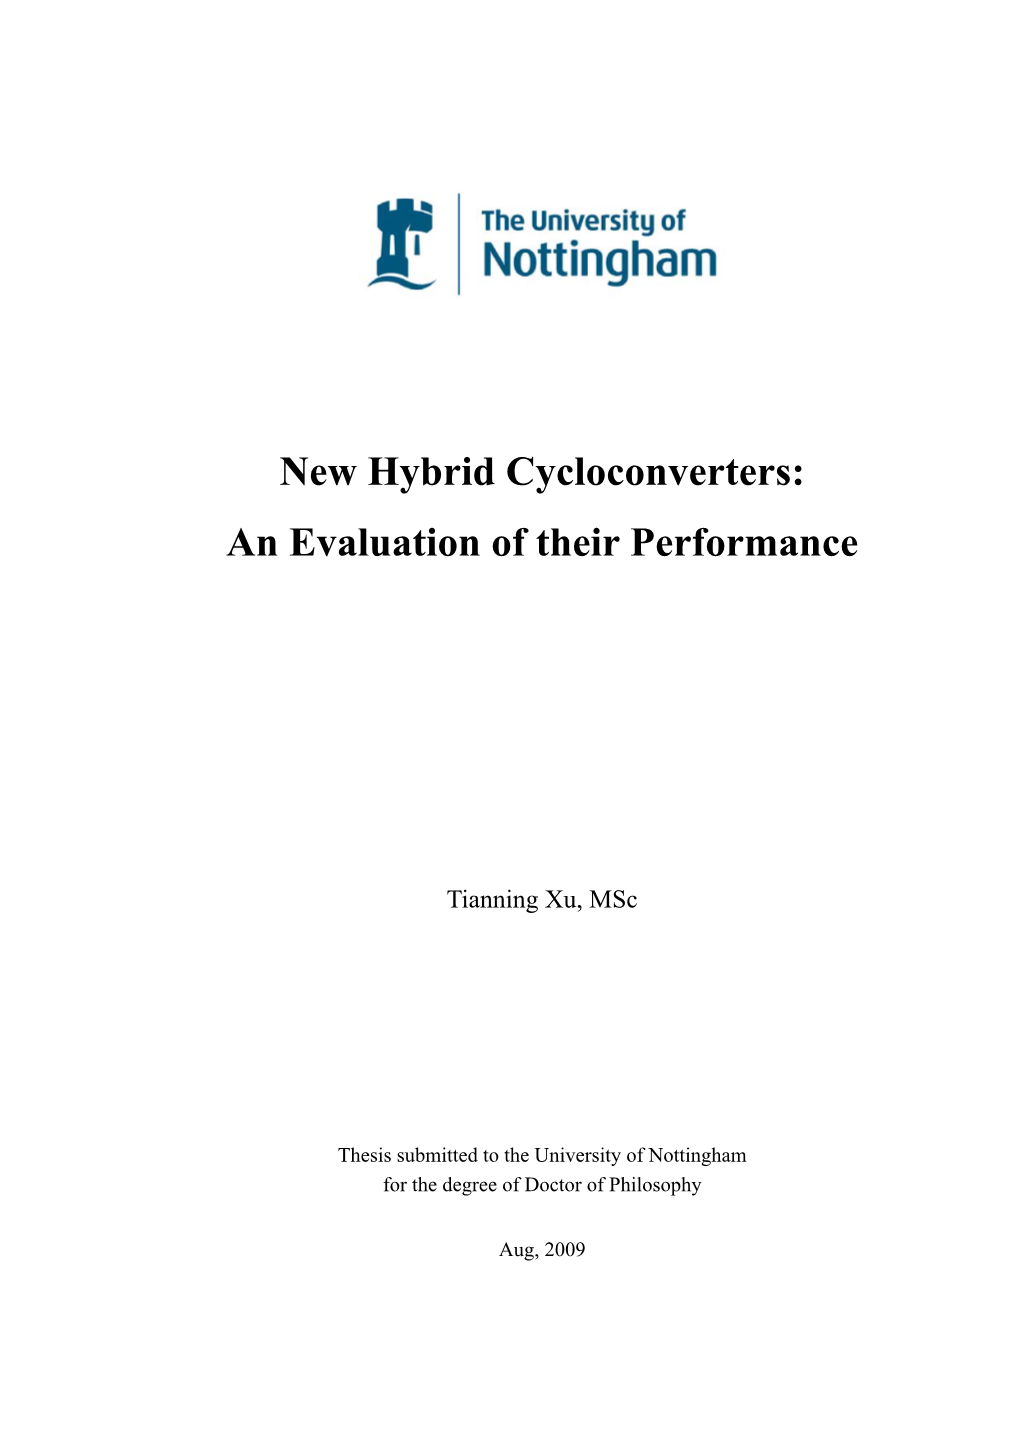 New Hybrid Cycloconverters: an Evaluation of Their Performance